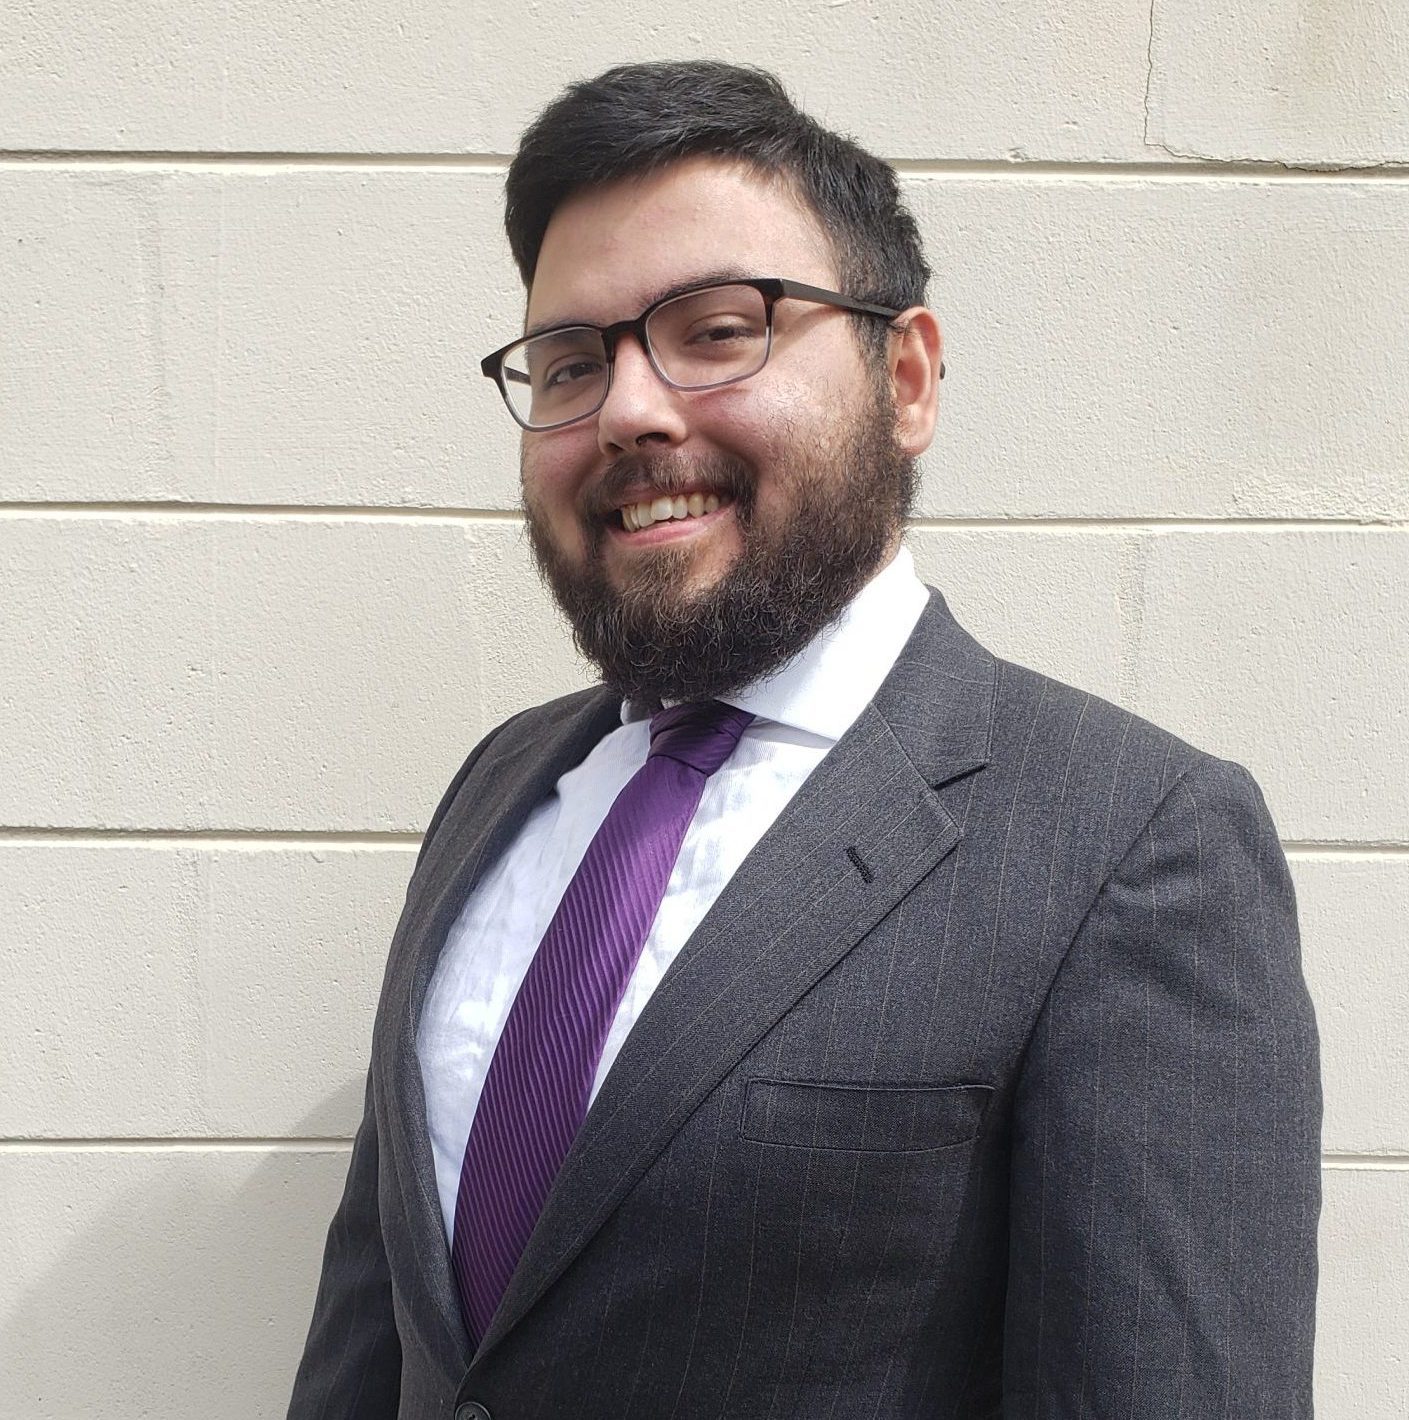 Jorge Alvarez in a black suit with a purple tie. Jorge stands in front of a white wall.